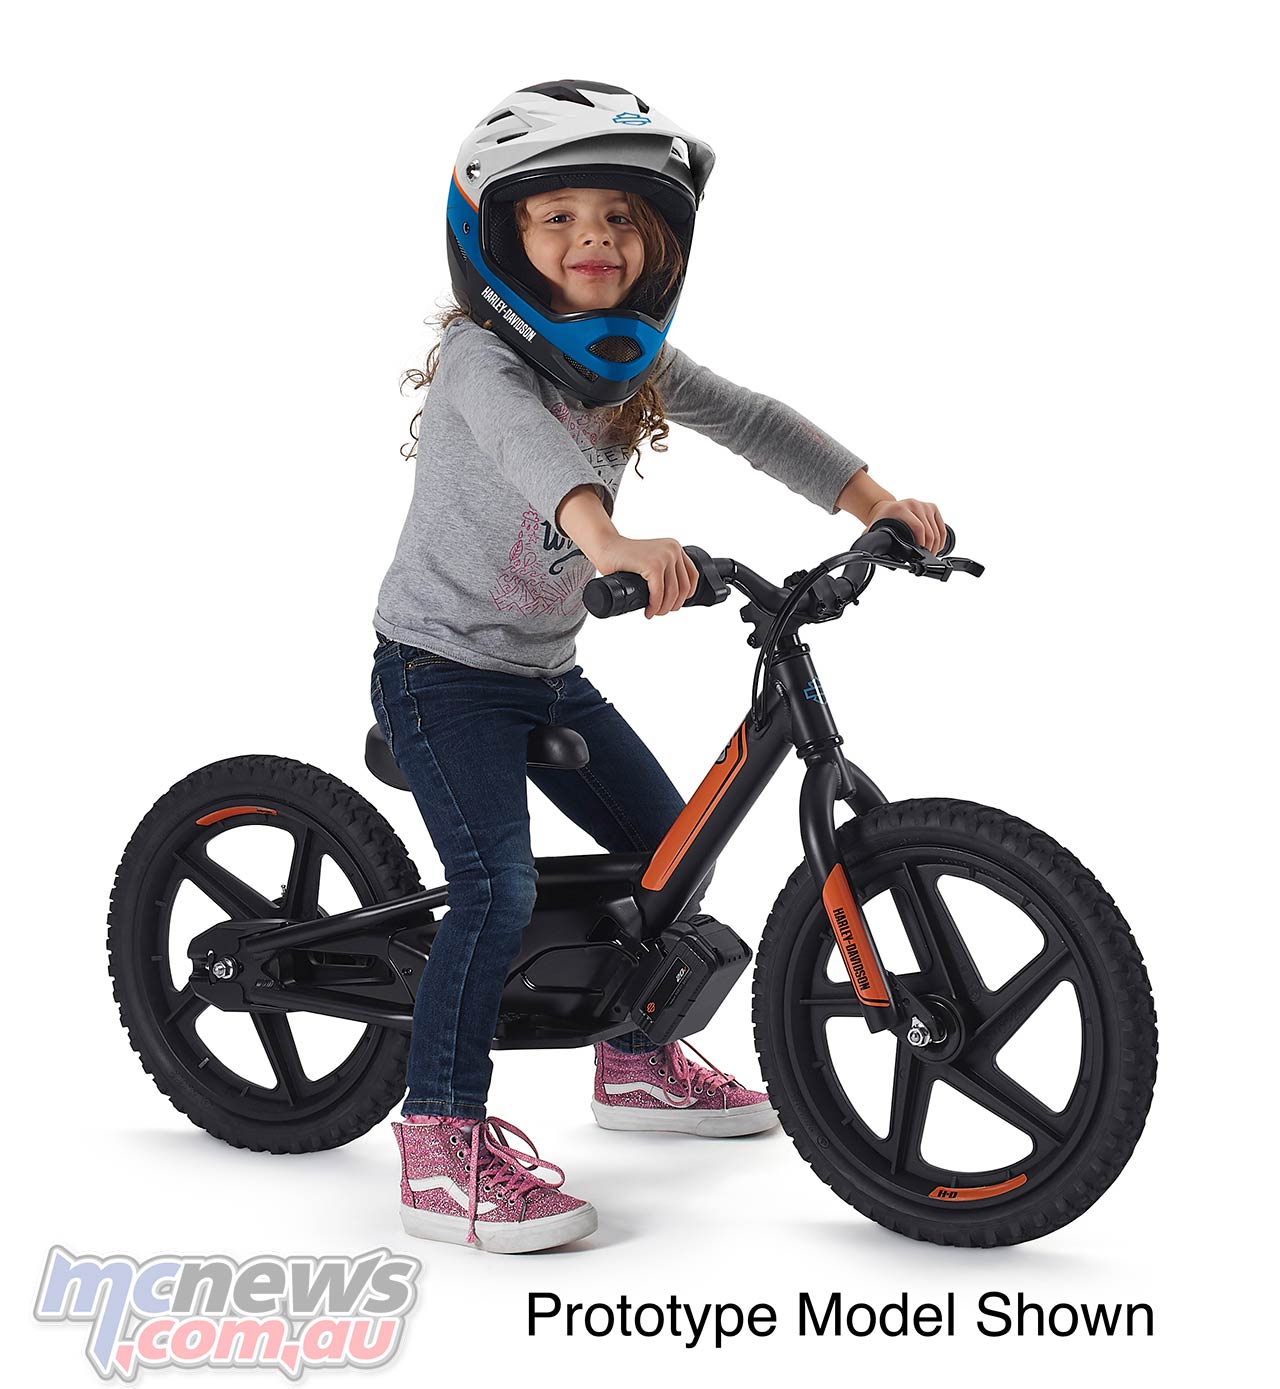 Harley Aim To Get Em Young With Electric Kids Bikes Stacyc Mcnews